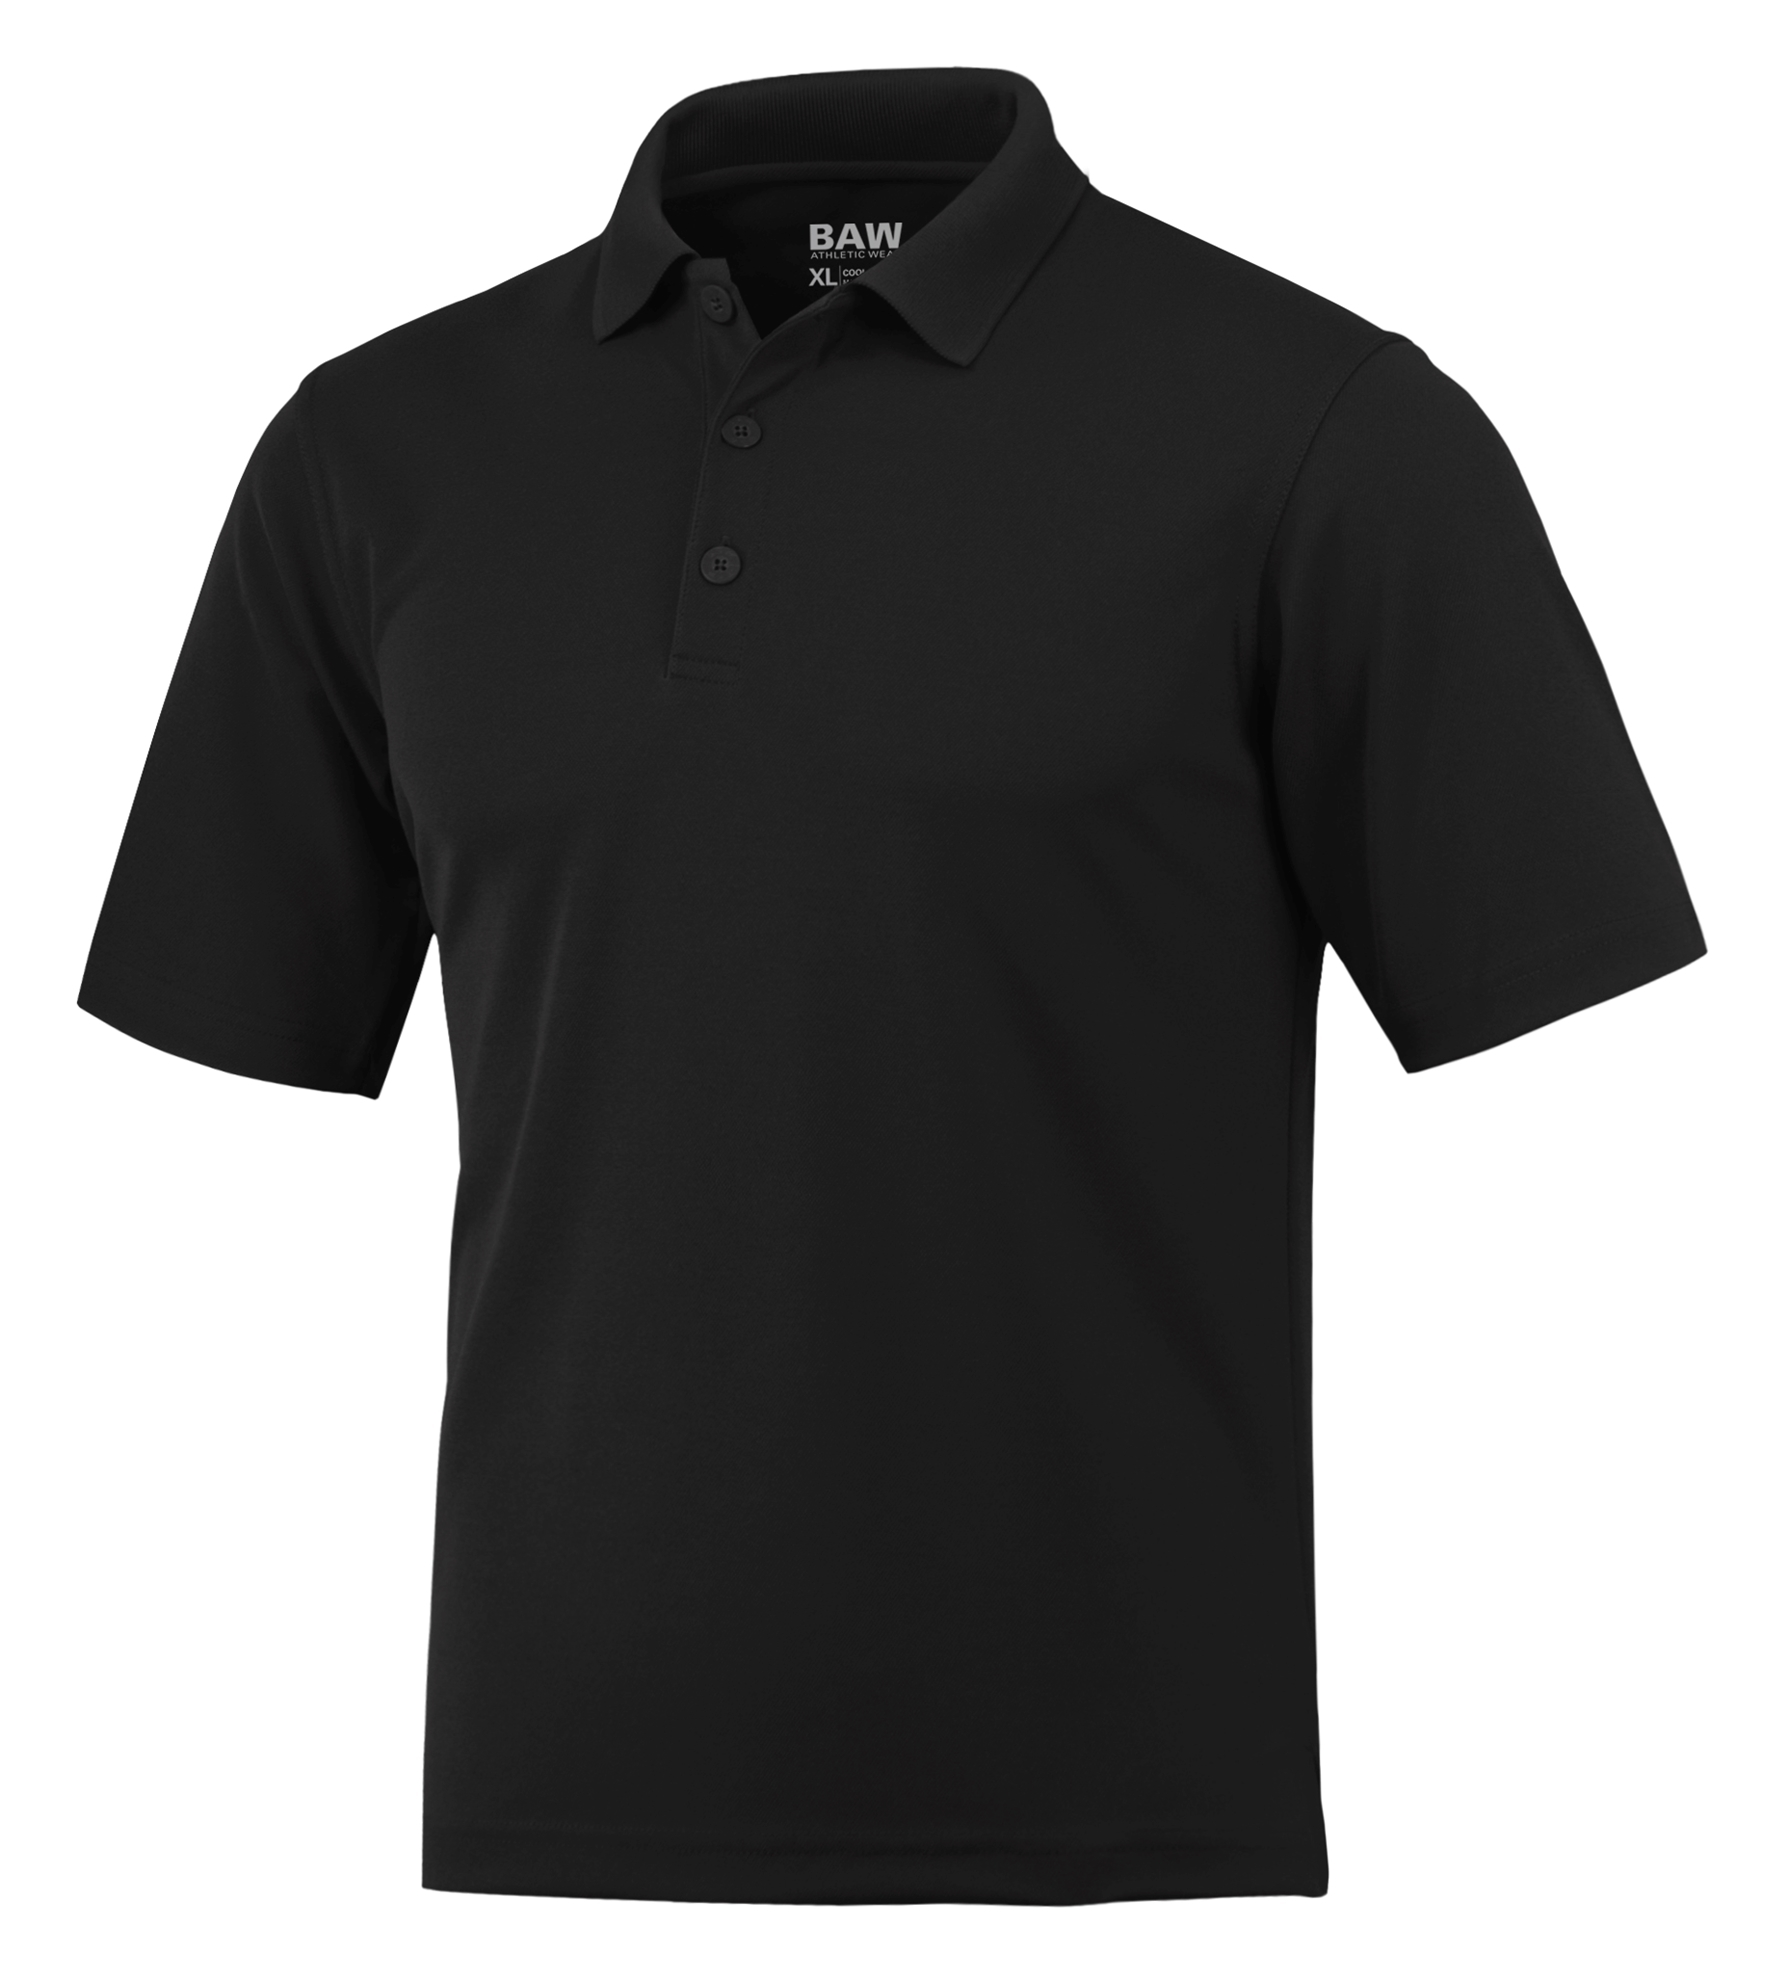 BAW Athletic Wear CT280 - Men's Solid Cool-Tek Polo